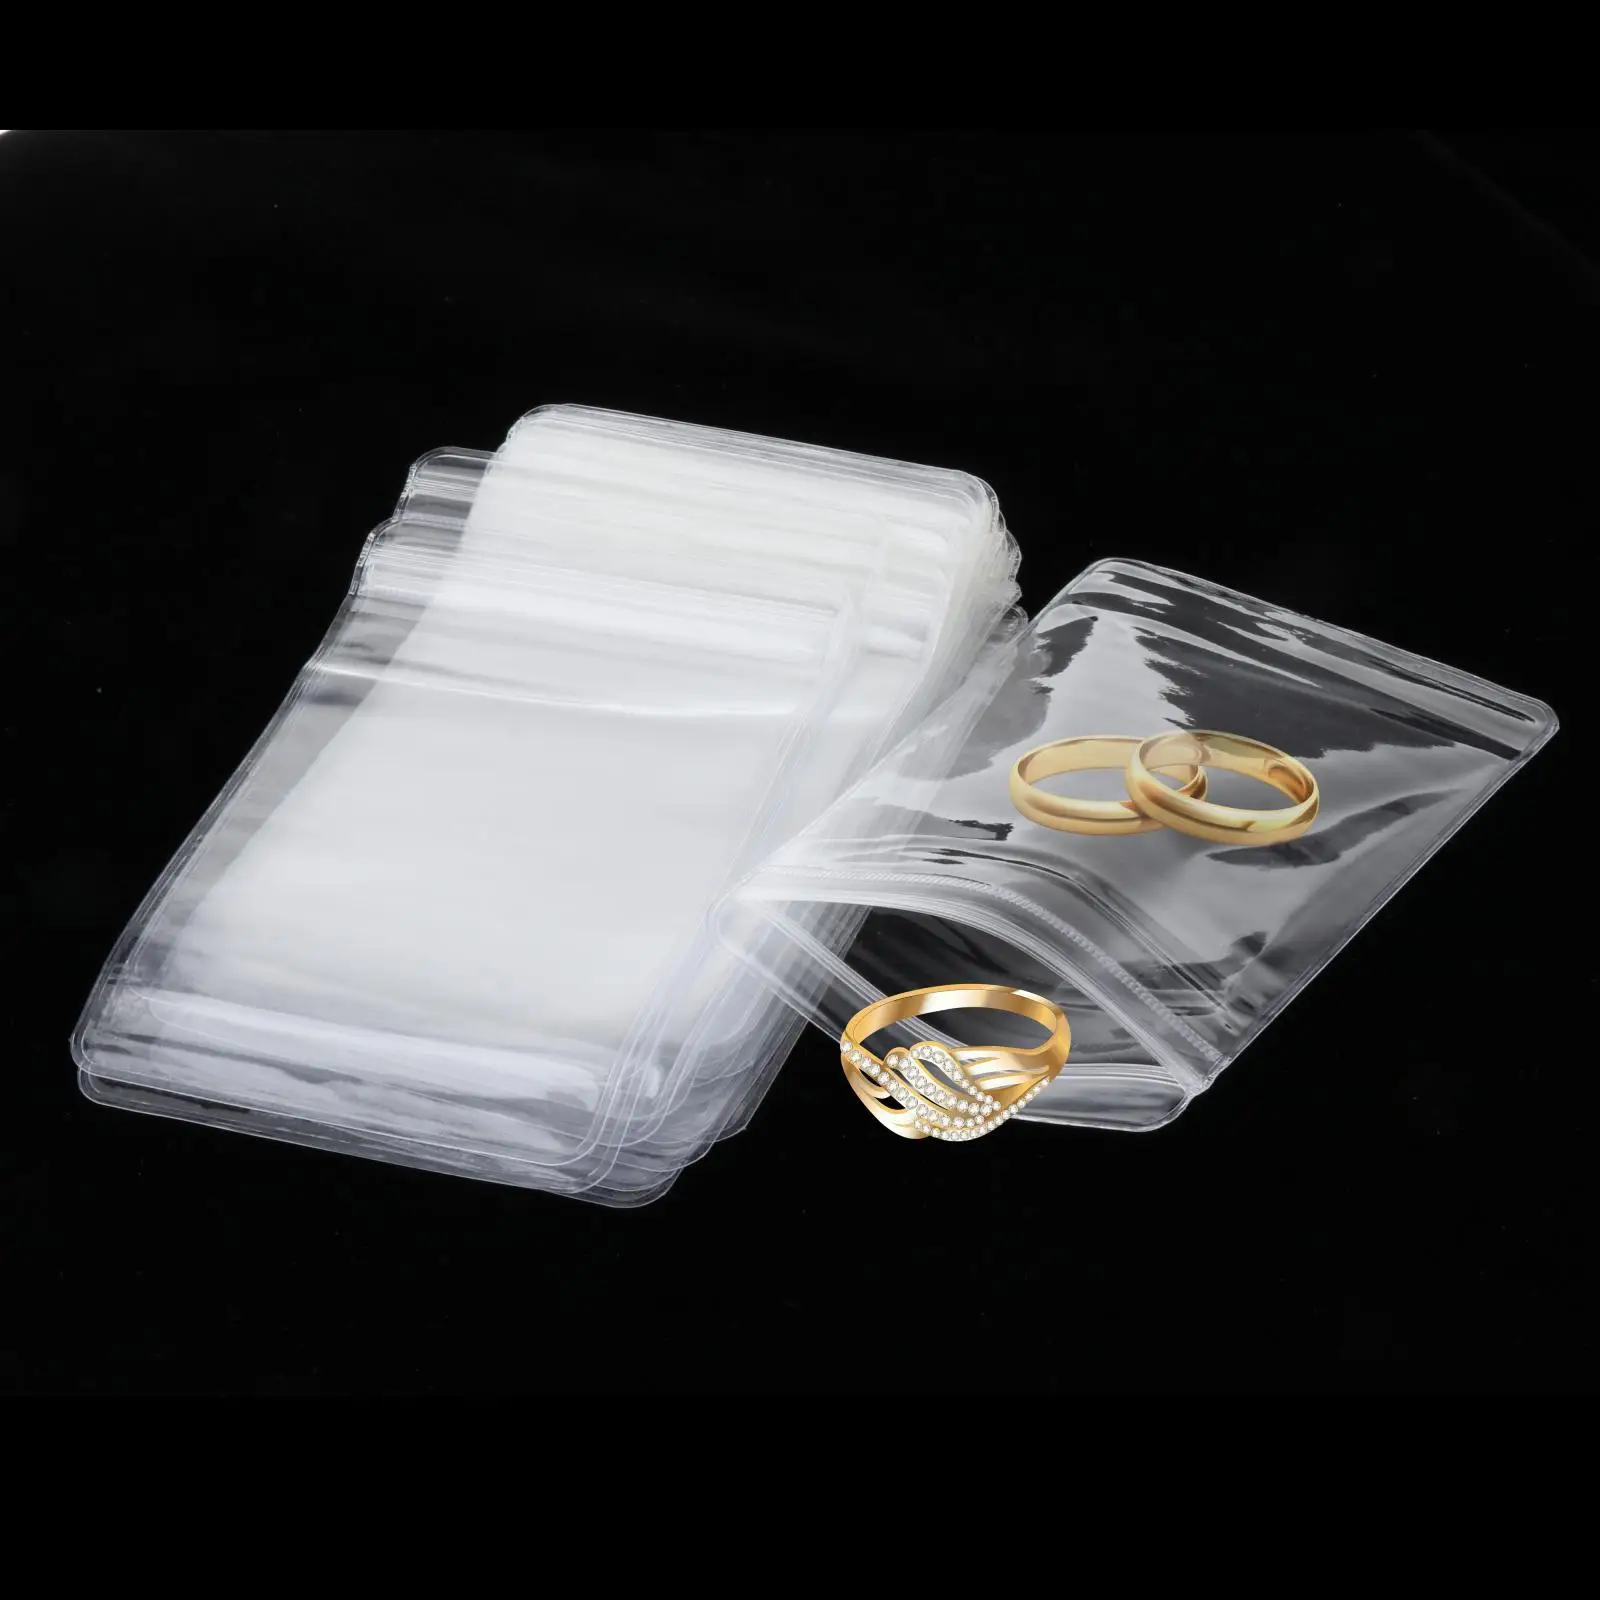 30Pieces Jewelry Storage Bags Clear Reusable Waterproof Small Packing Pouch for Holding Jewelry Rings Crafts Necklace Earrings